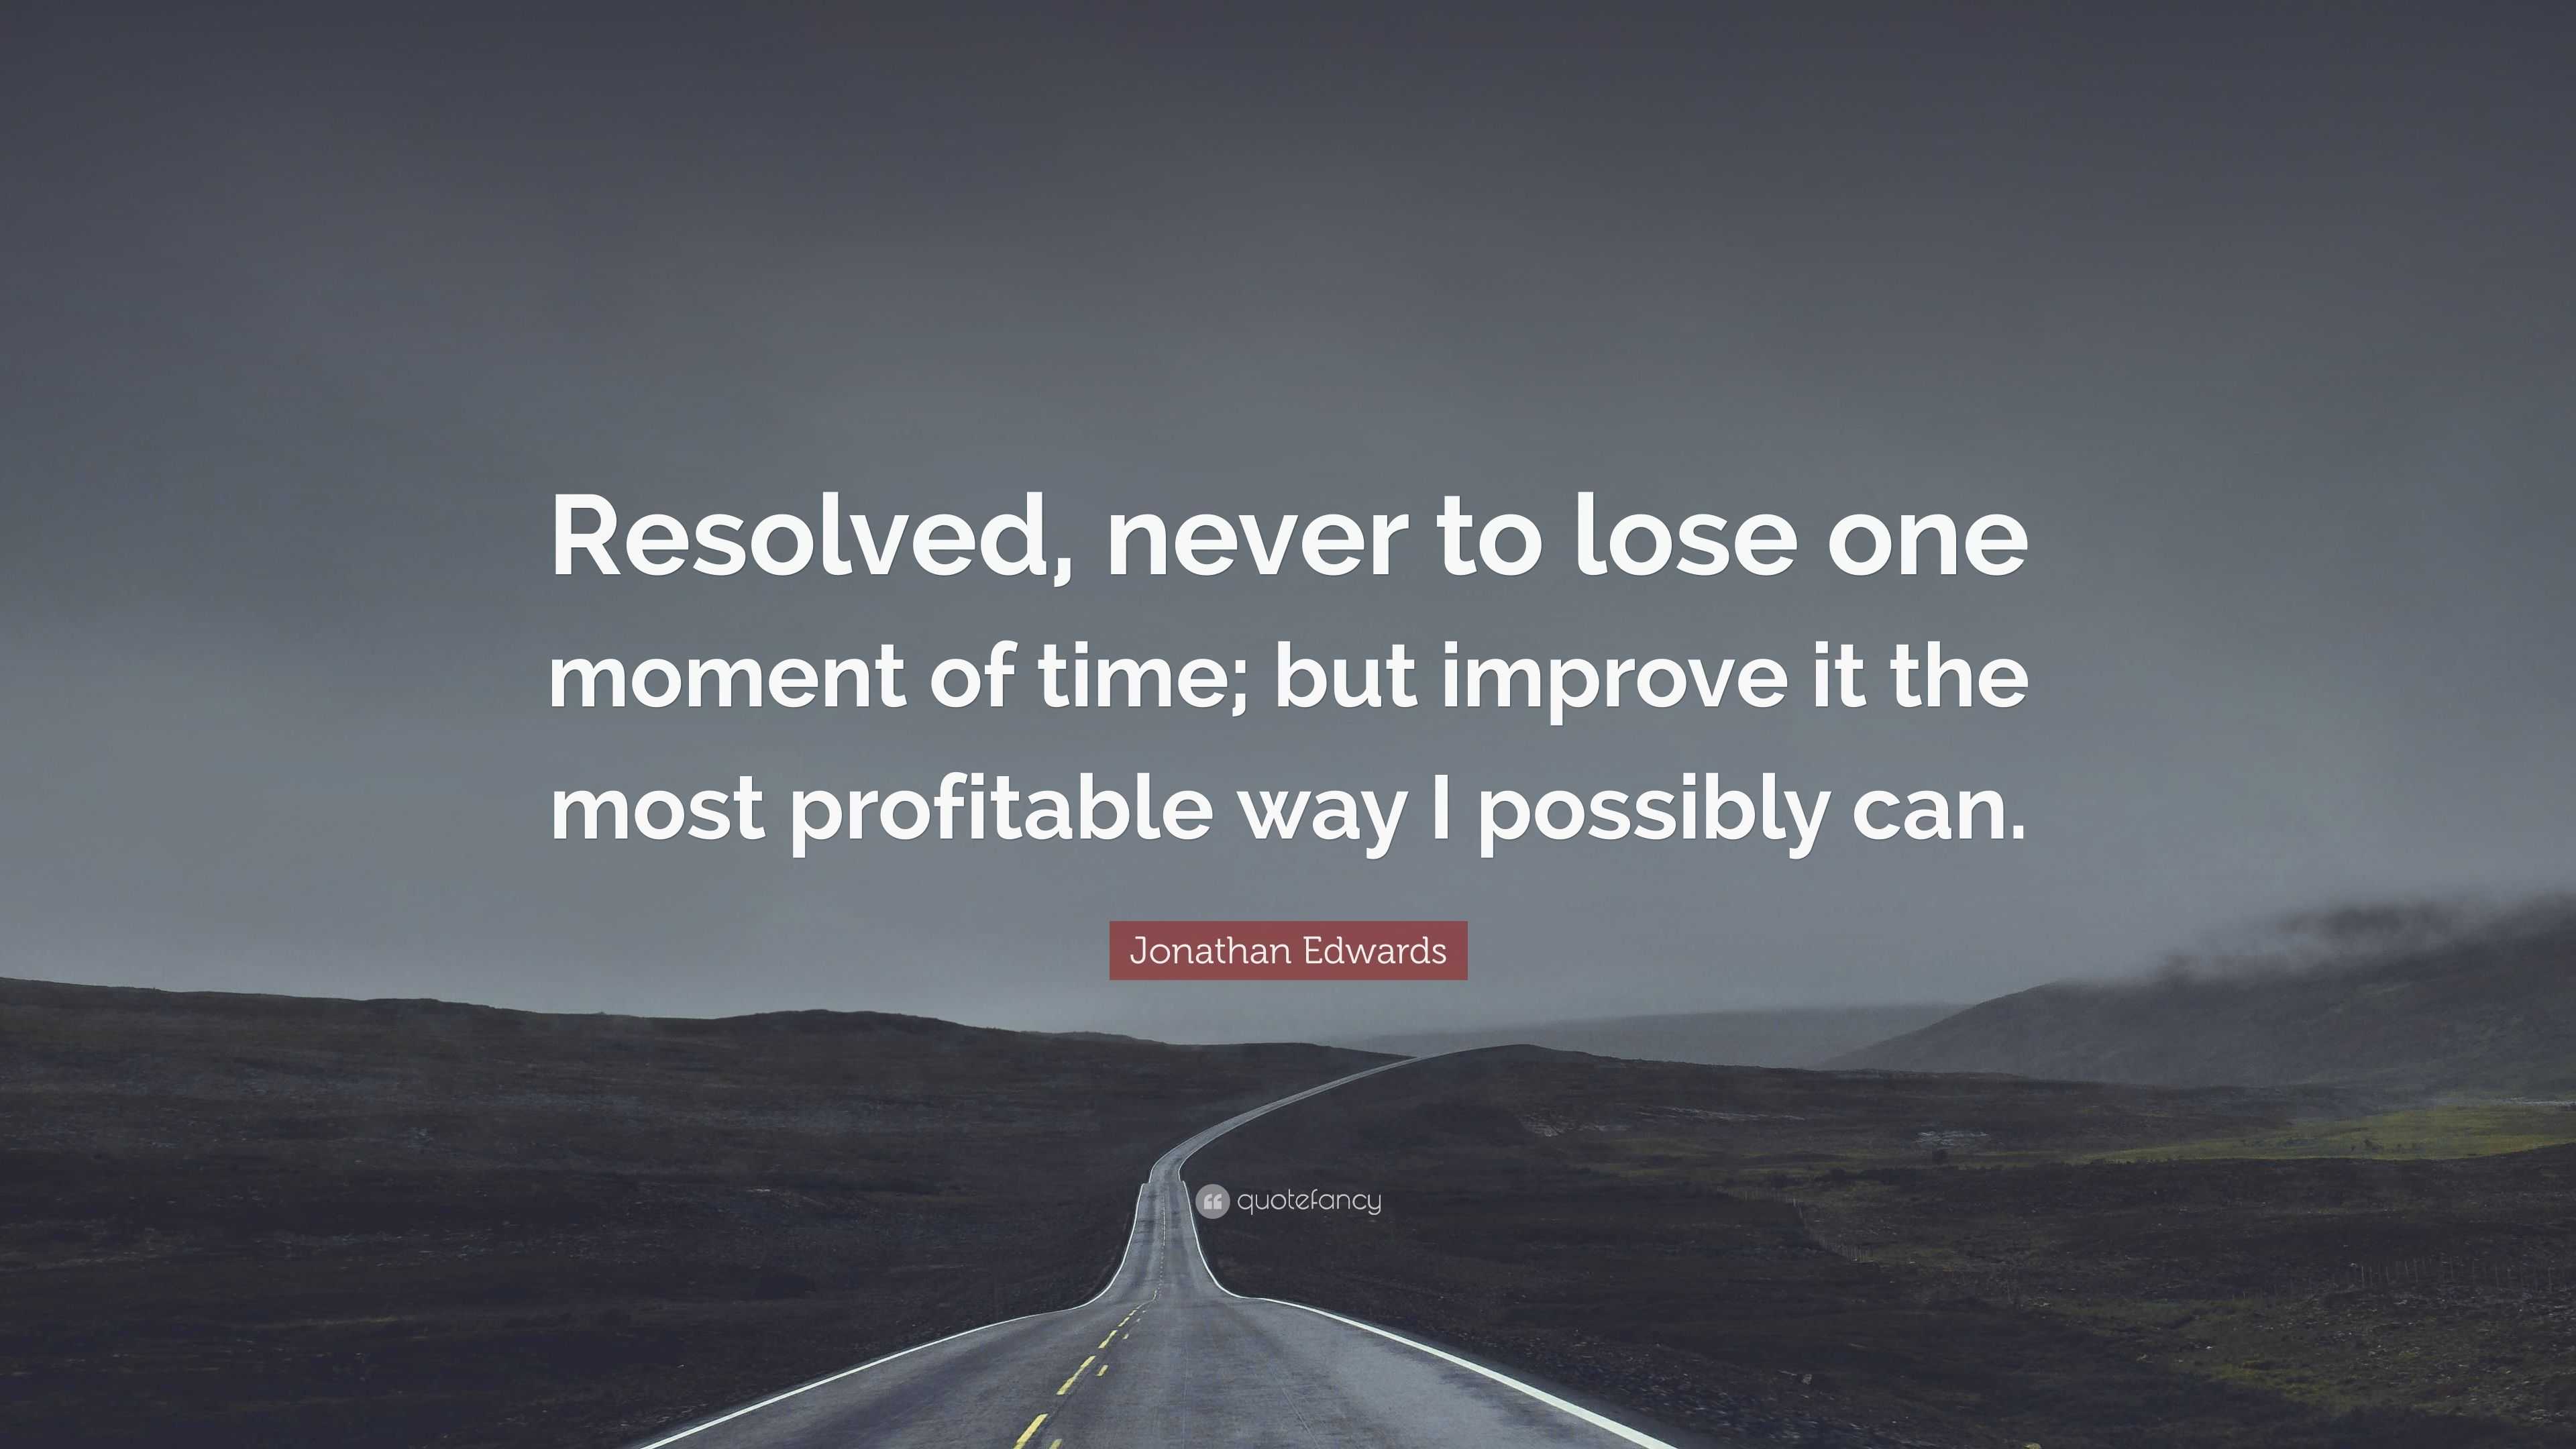 Jonathan Edwards Quote: “Resolved, never to lose one moment of time ...